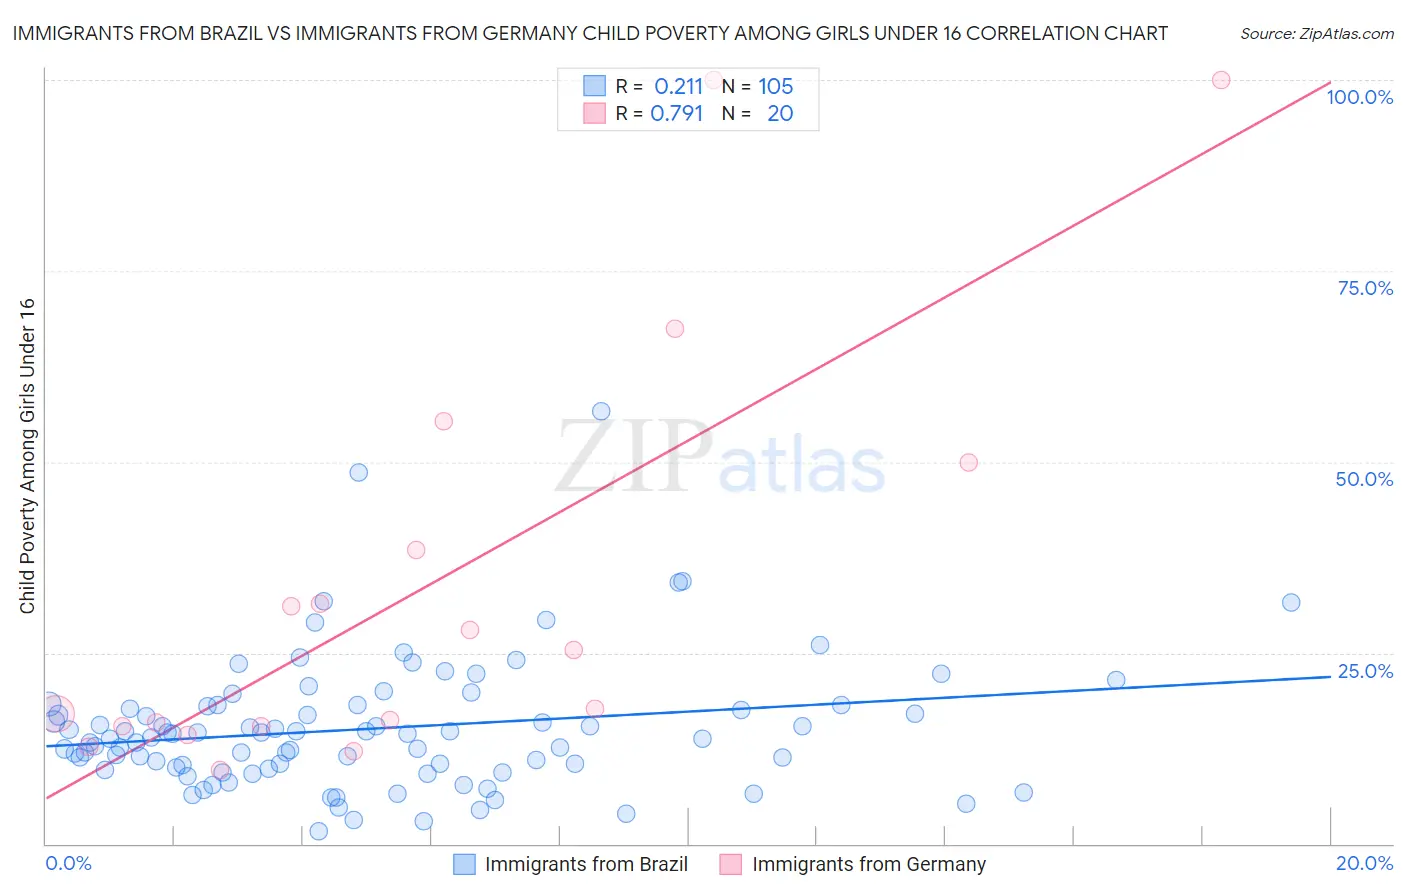 Immigrants from Brazil vs Immigrants from Germany Child Poverty Among Girls Under 16